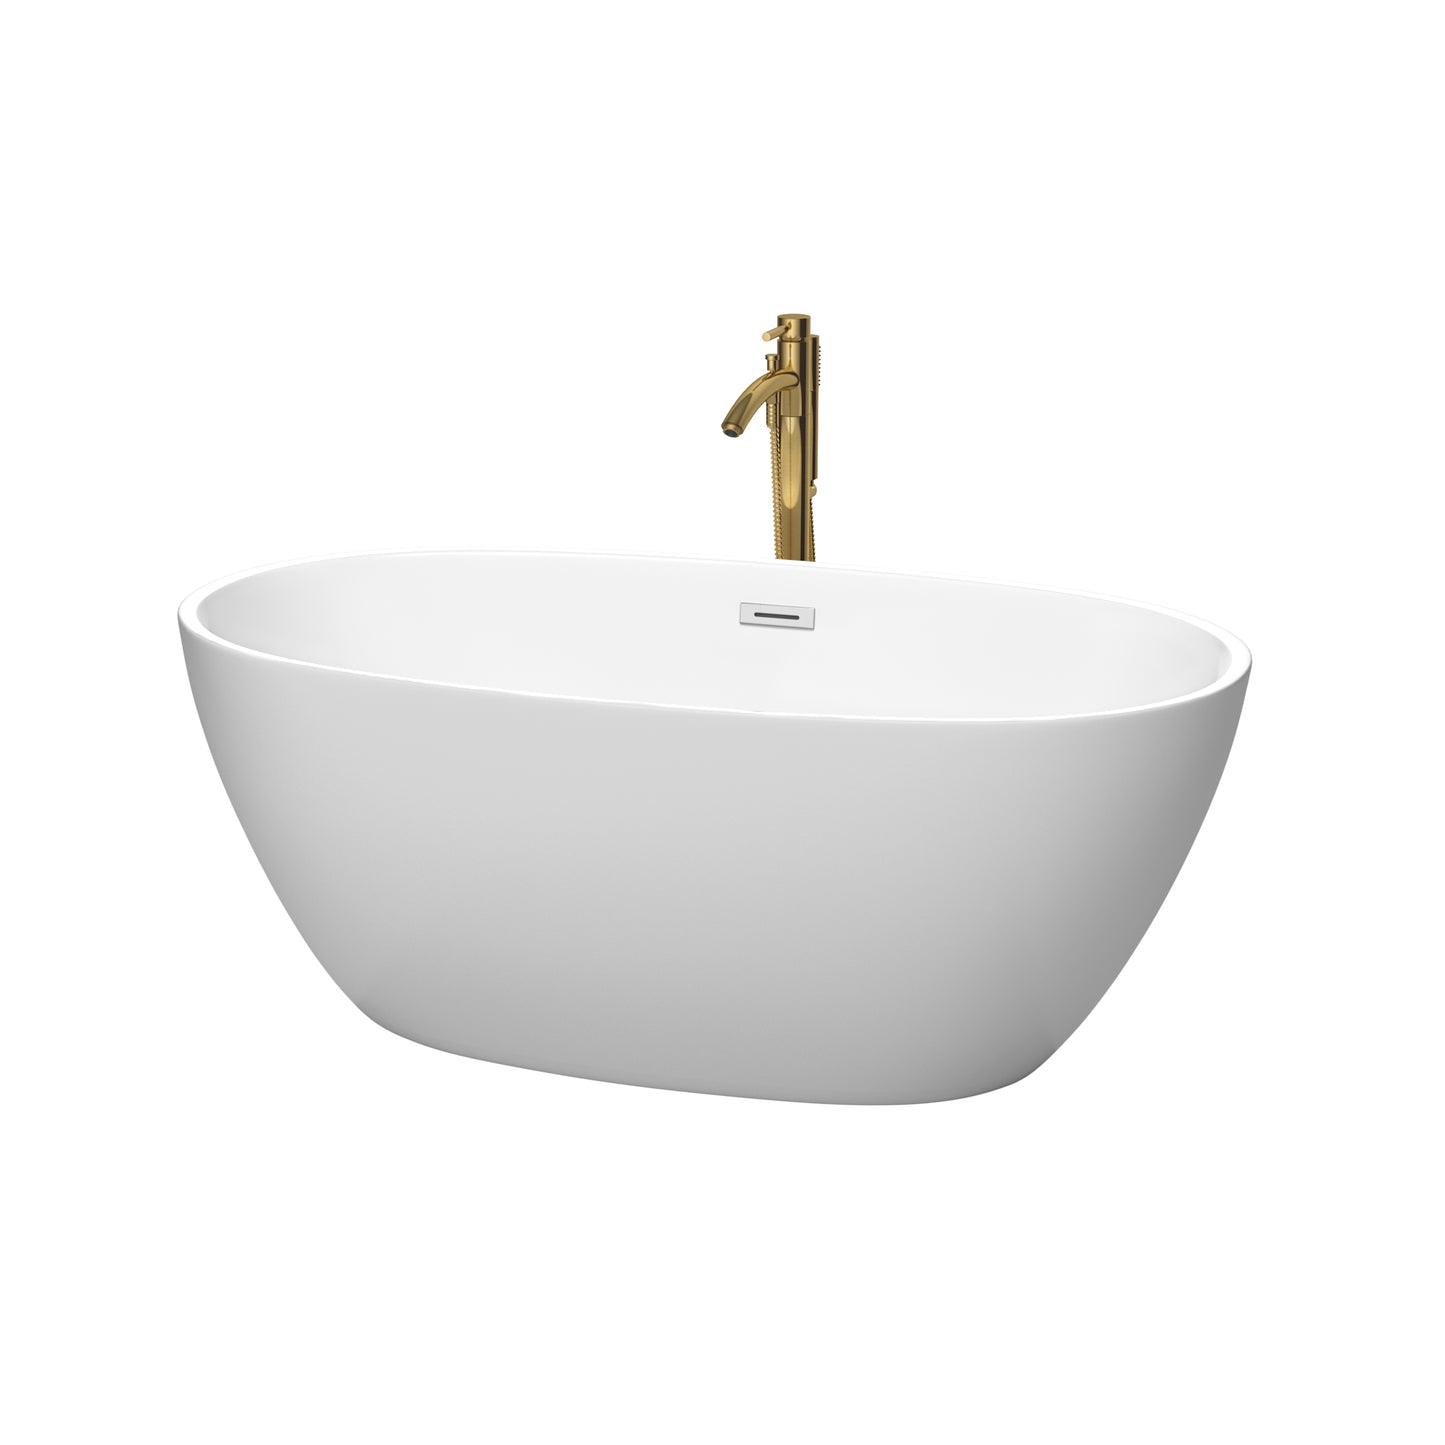 Wyndham Collection Juno 59 Inch Freestanding Bathtub in Matte White with Floor Mounted Faucet, Drain and Overflow Trim - Luxe Bathroom Vanities